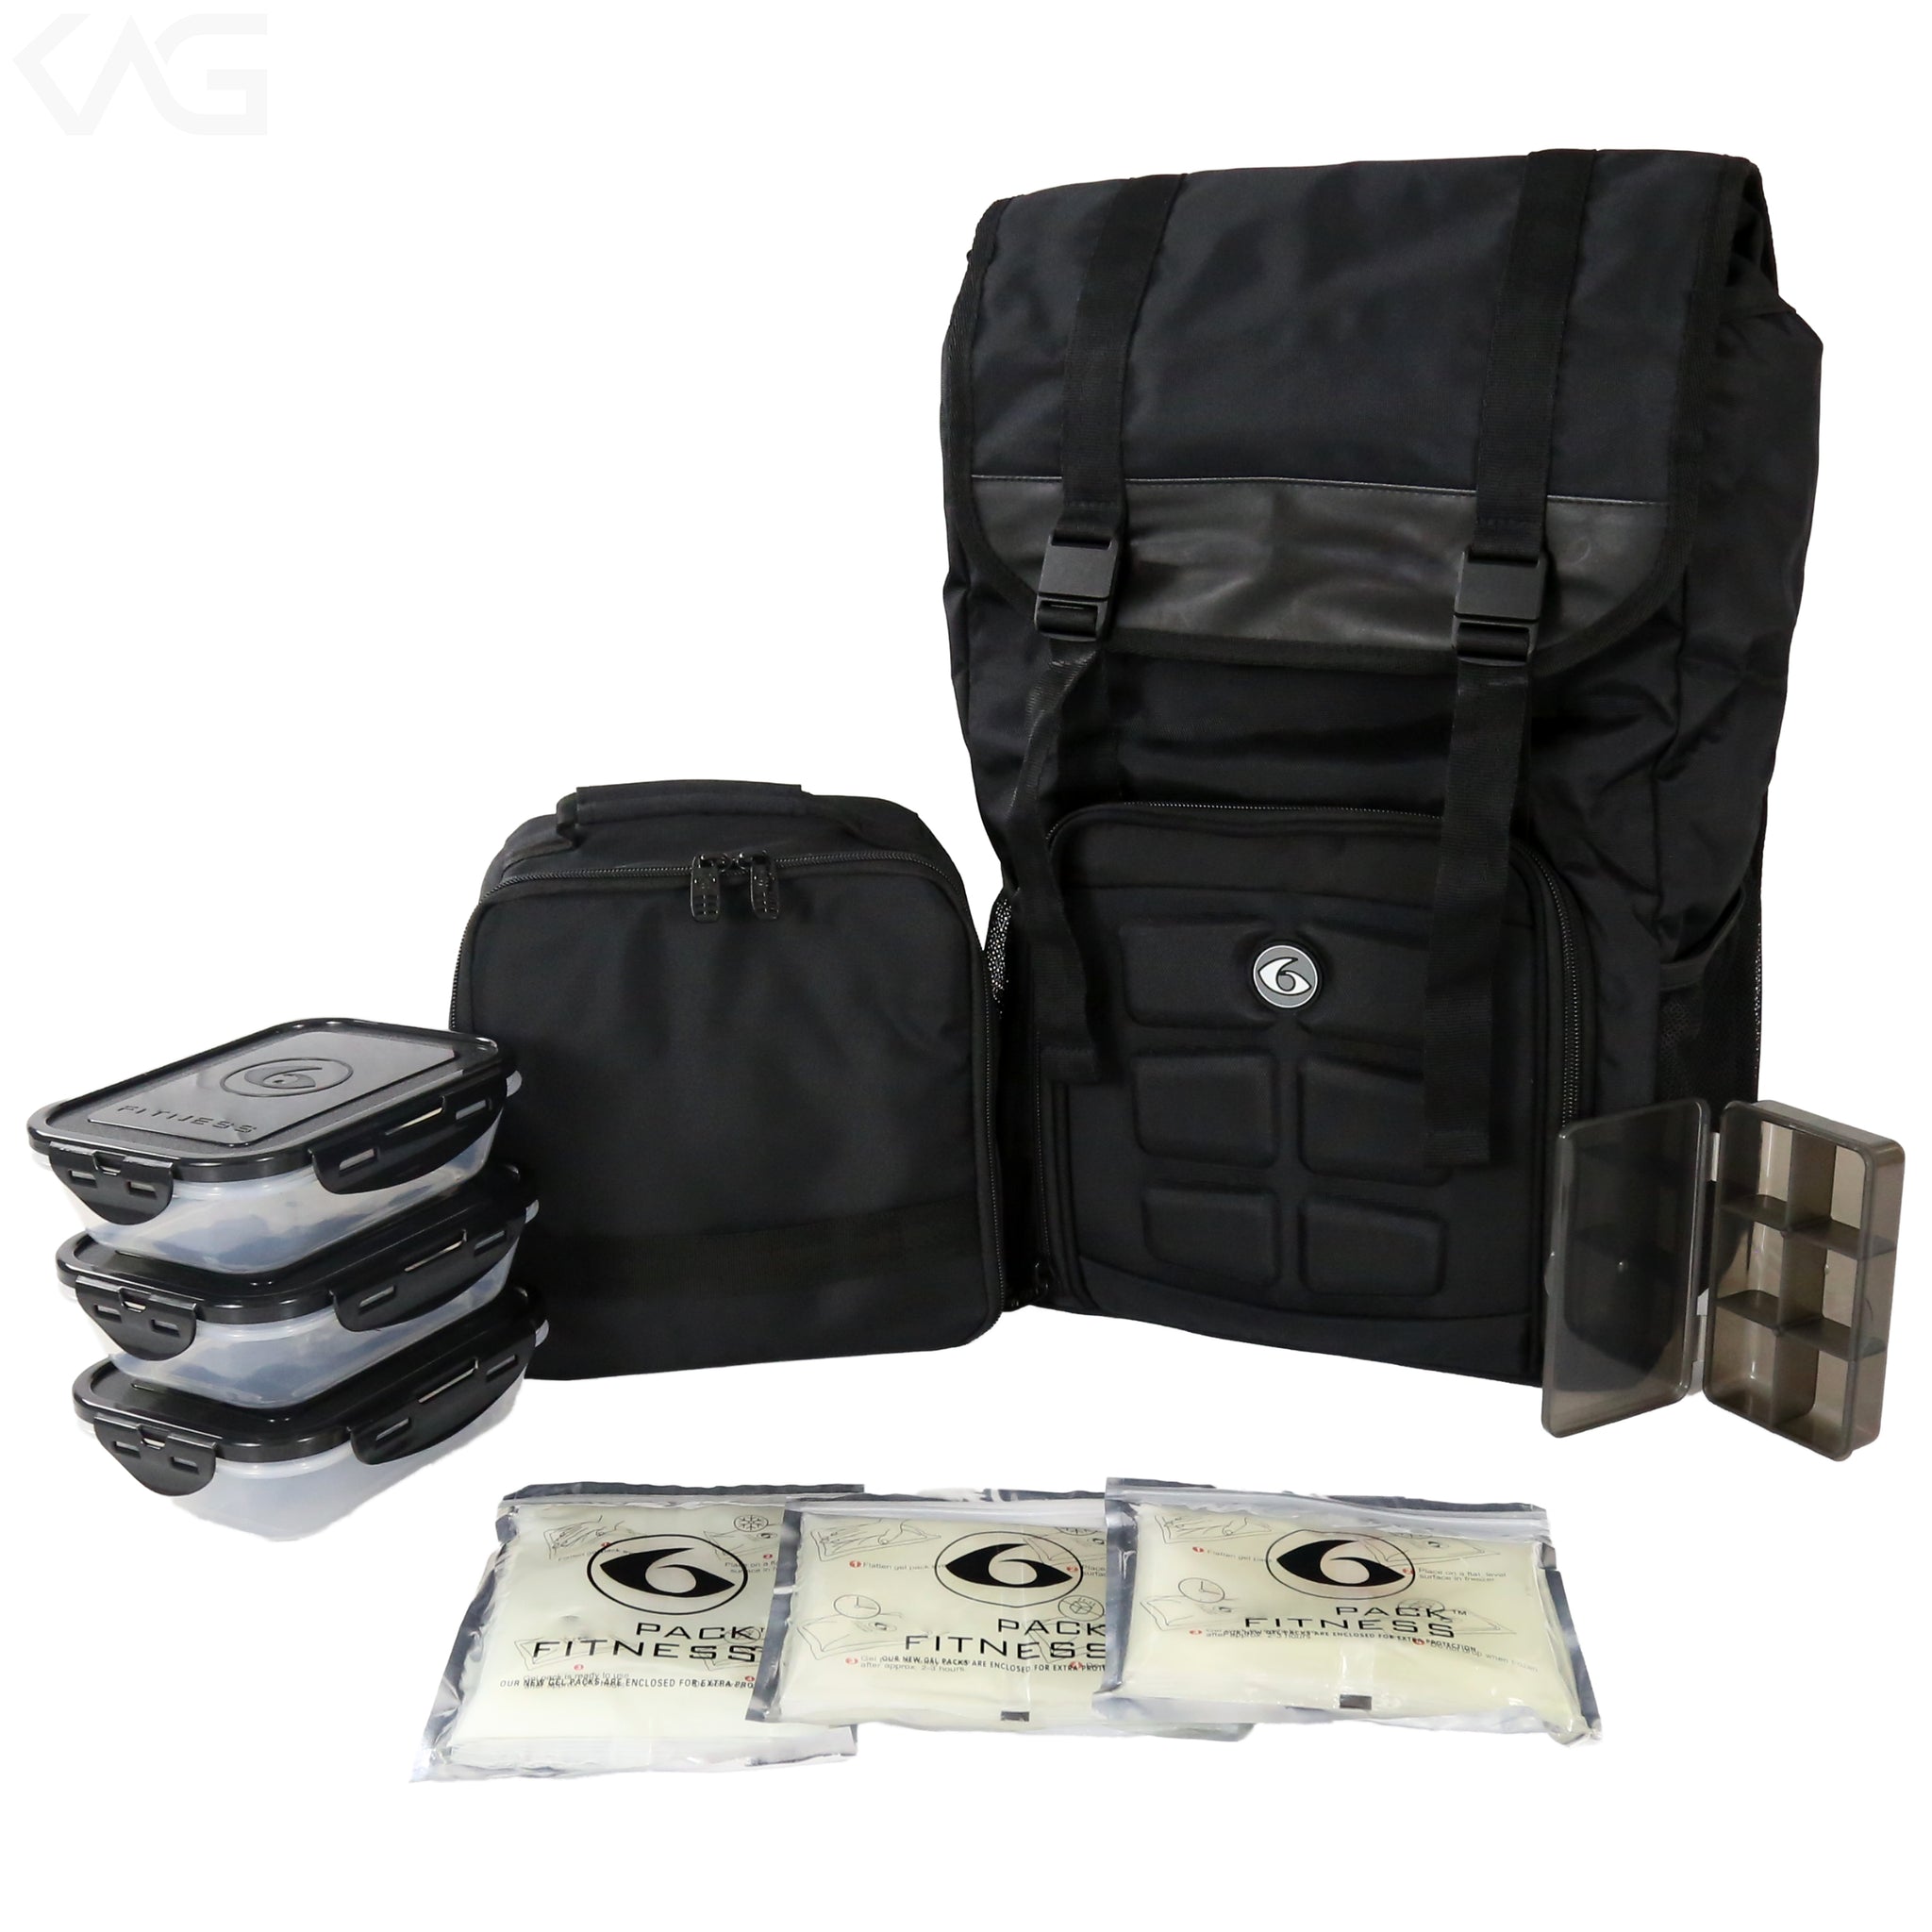 6 Pack Fitness, Six Pack Bags, Meal Management System